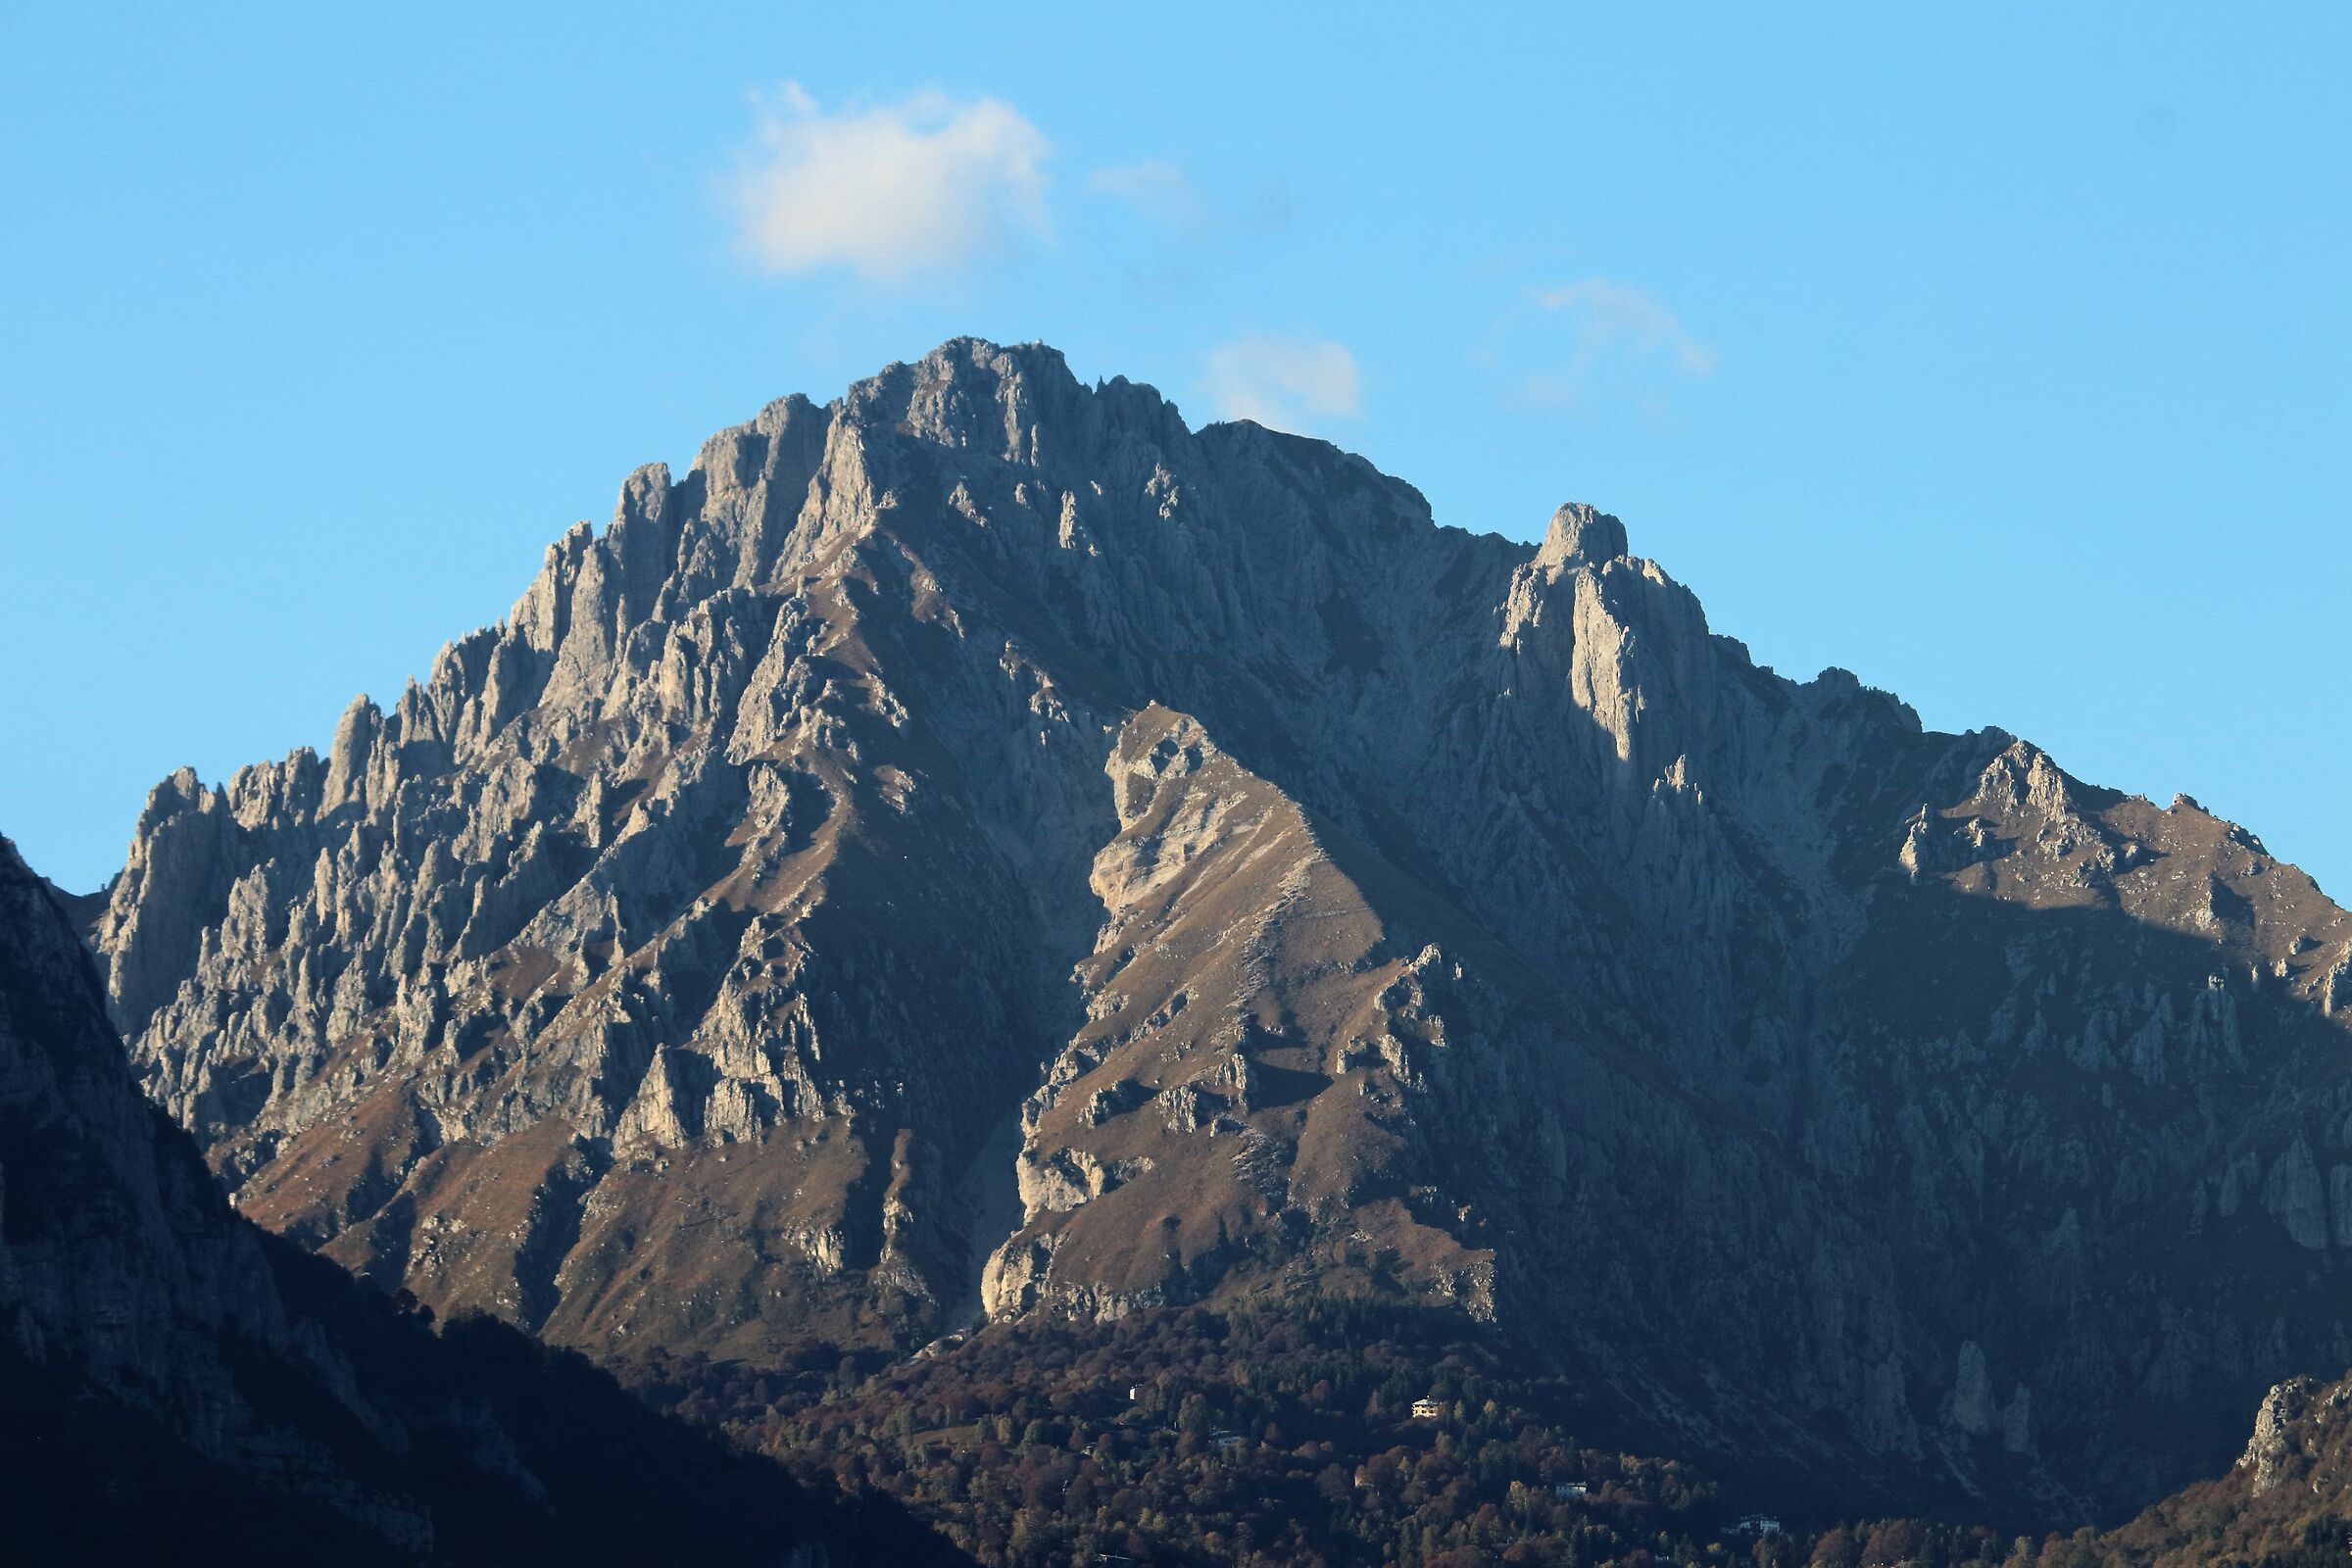 The Grigna...